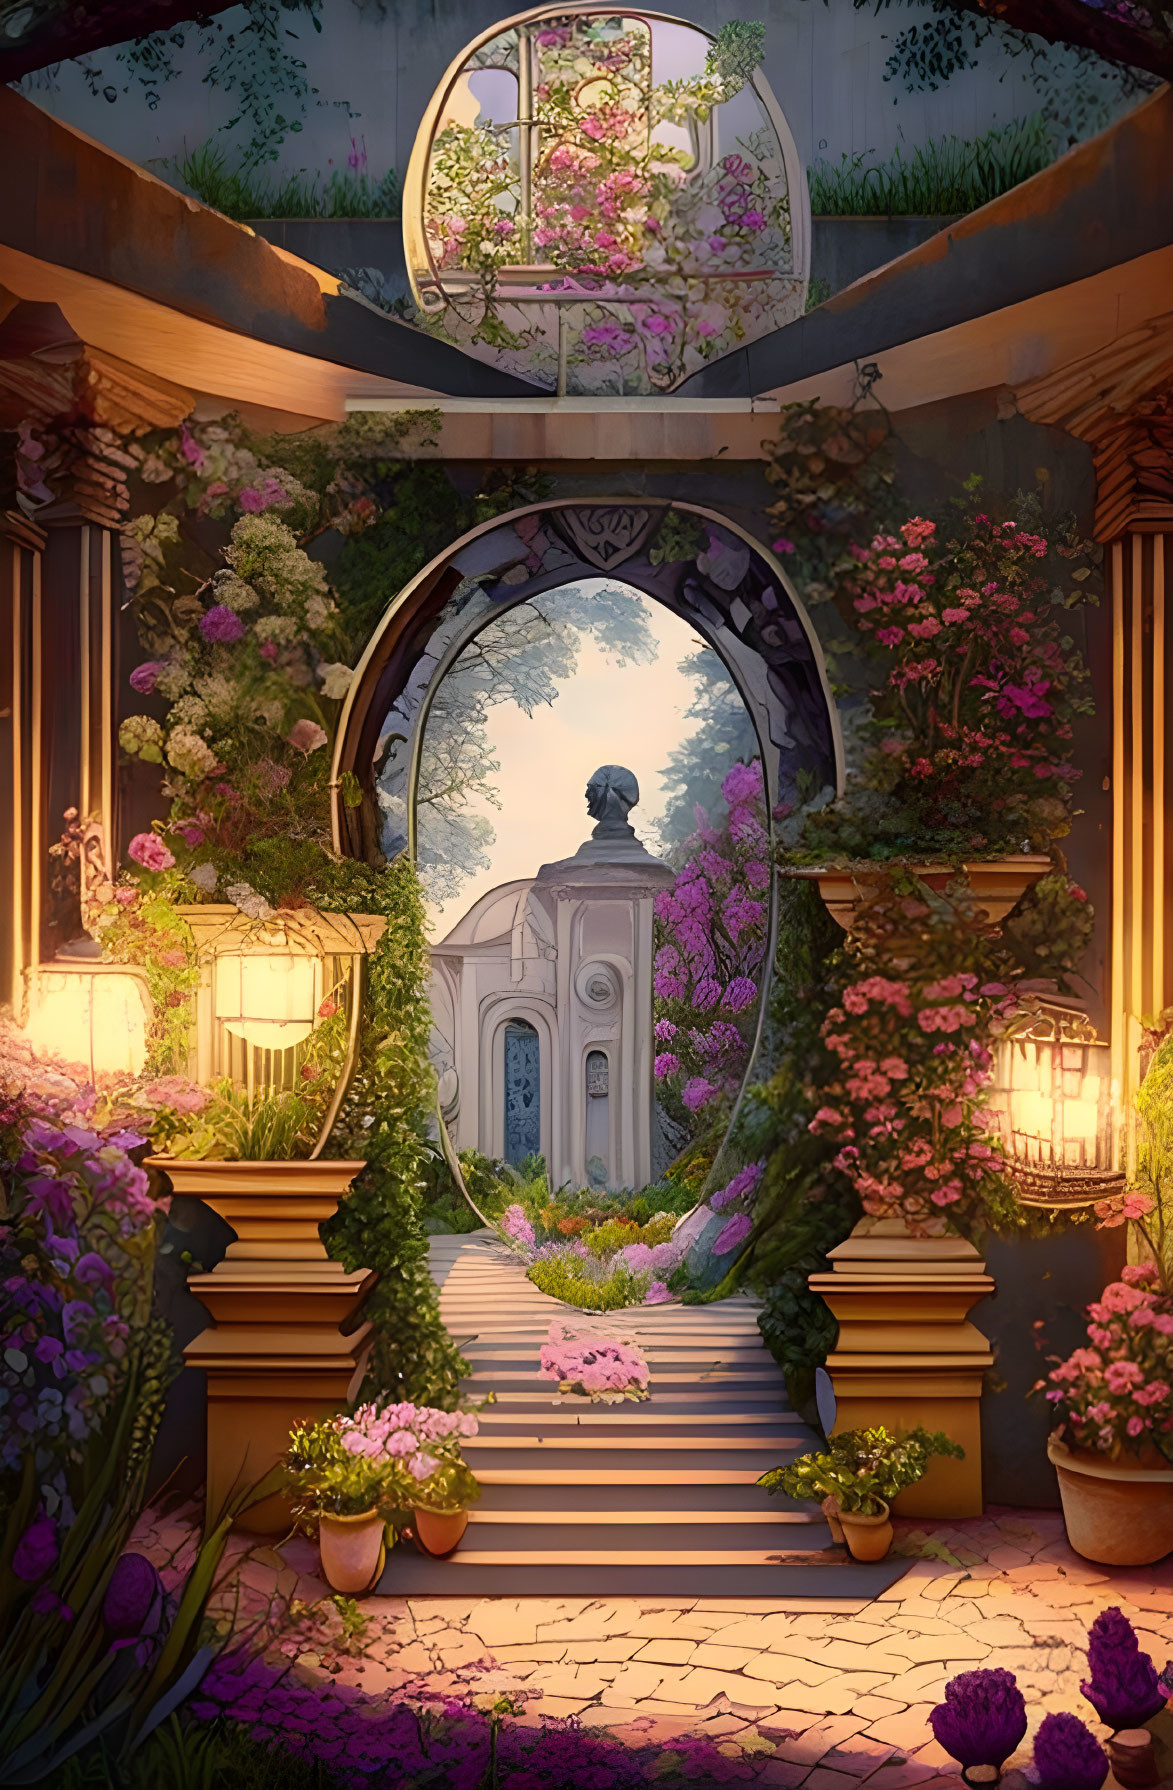 Enchanting garden scene with archway, statue, building, flowers, plants, and lanterns